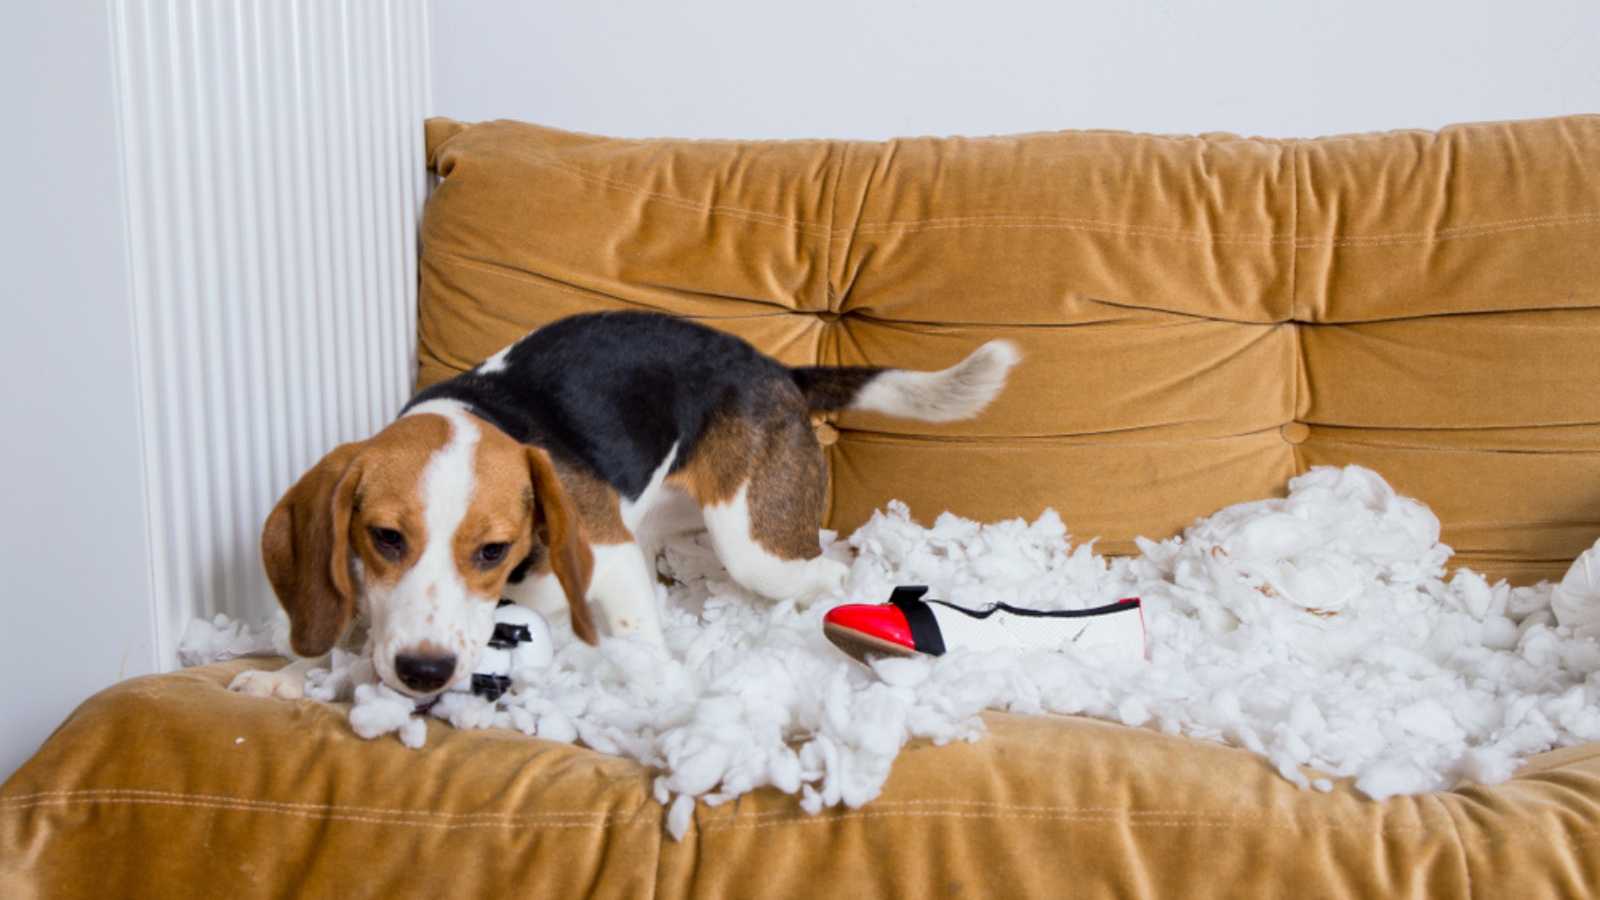 The beagle dog is making a mess